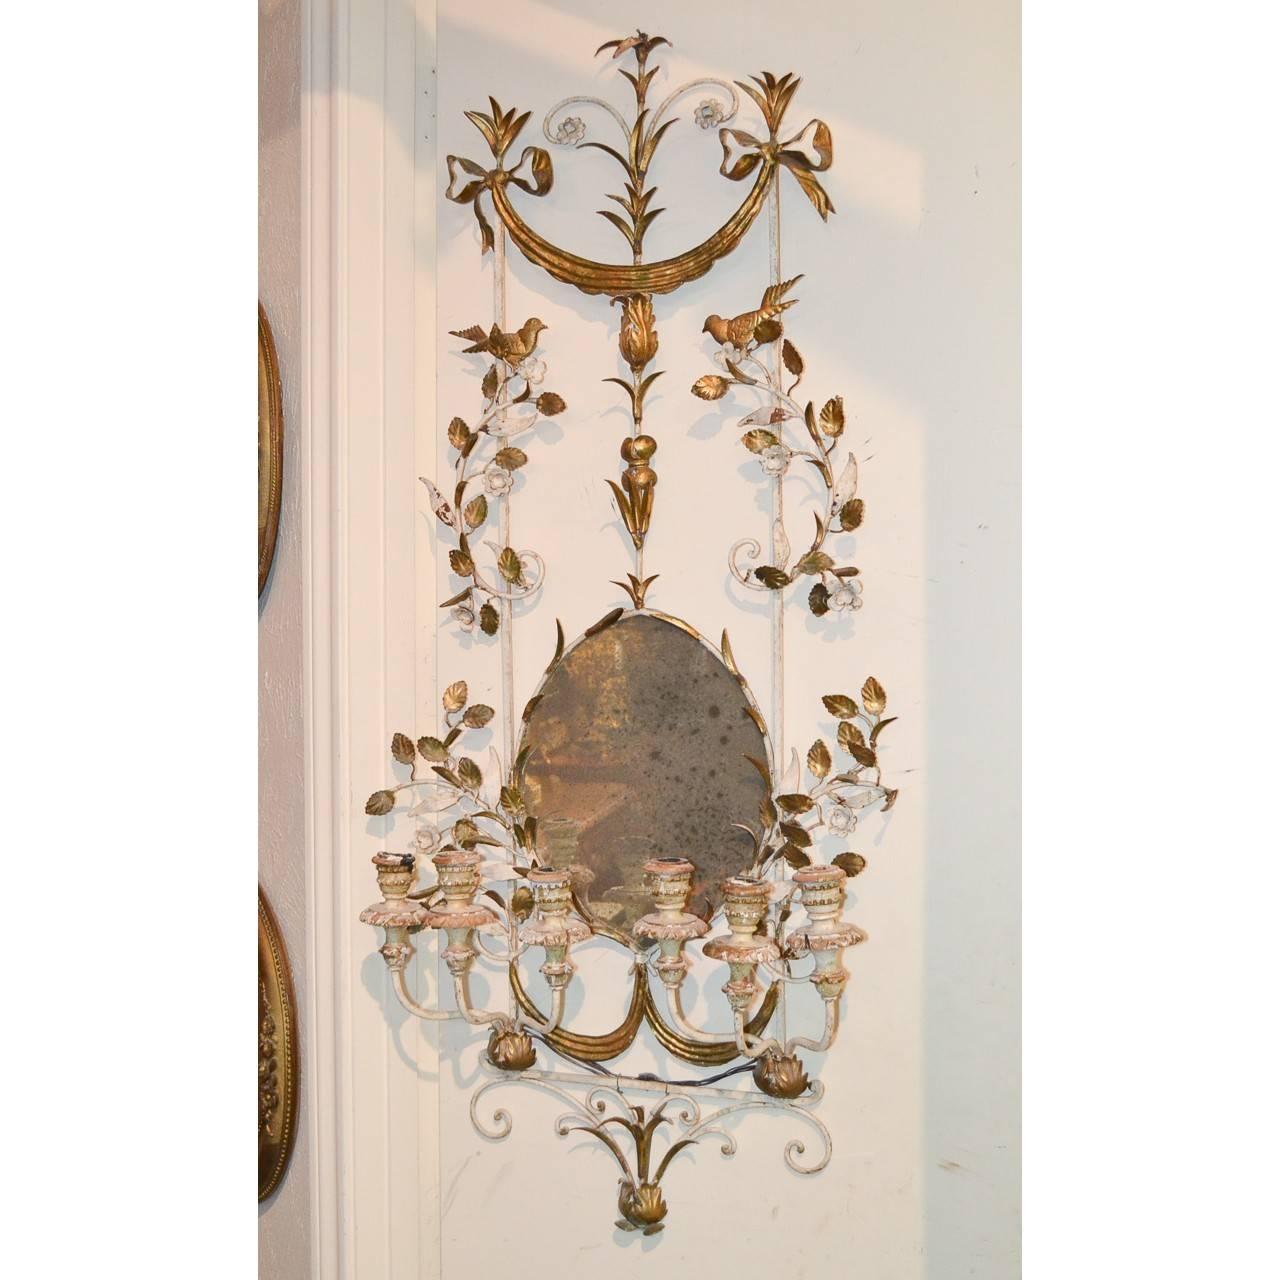 Hand-Painted 1920s Exceptional Parisian Metal Candelabra Sconce